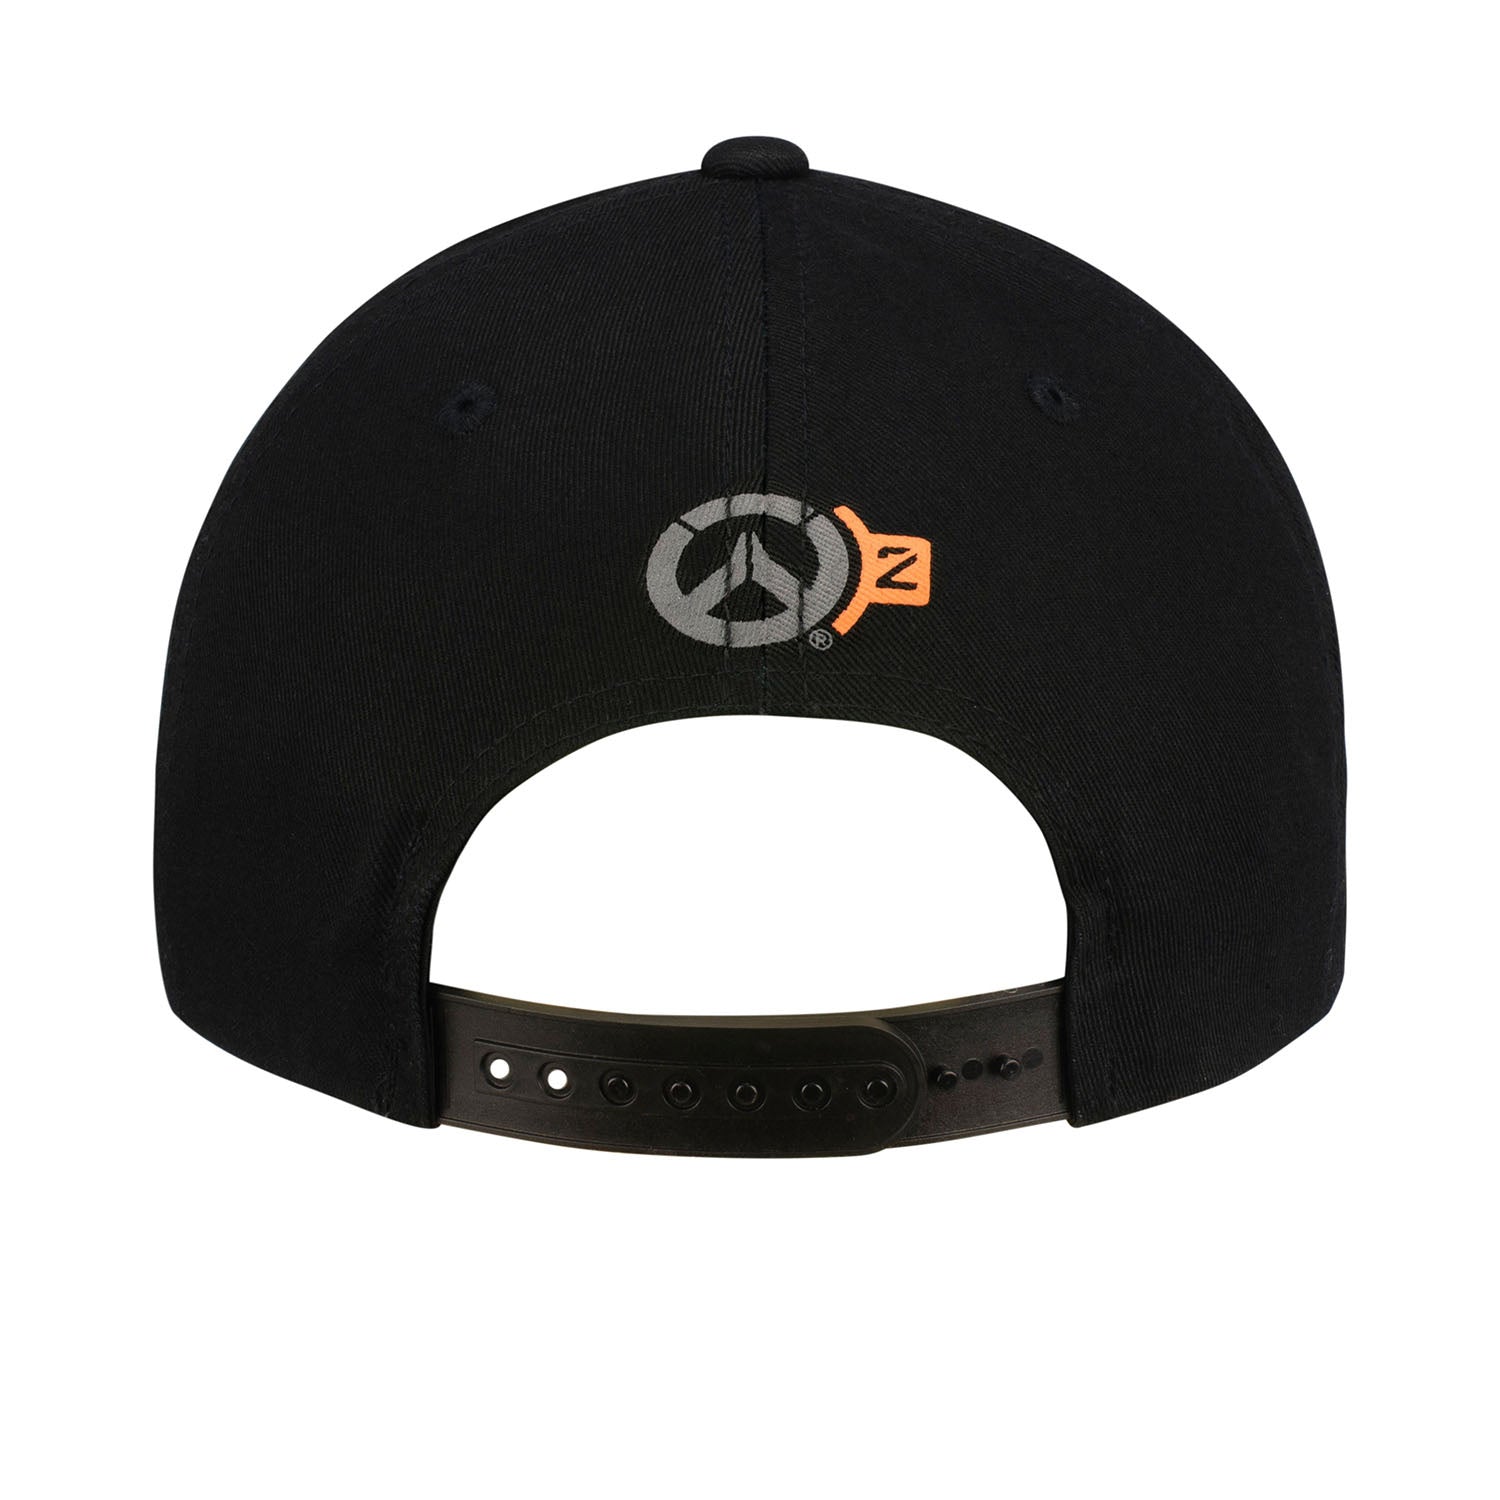 Overwatch 2 Tracer Black Hat - Back View